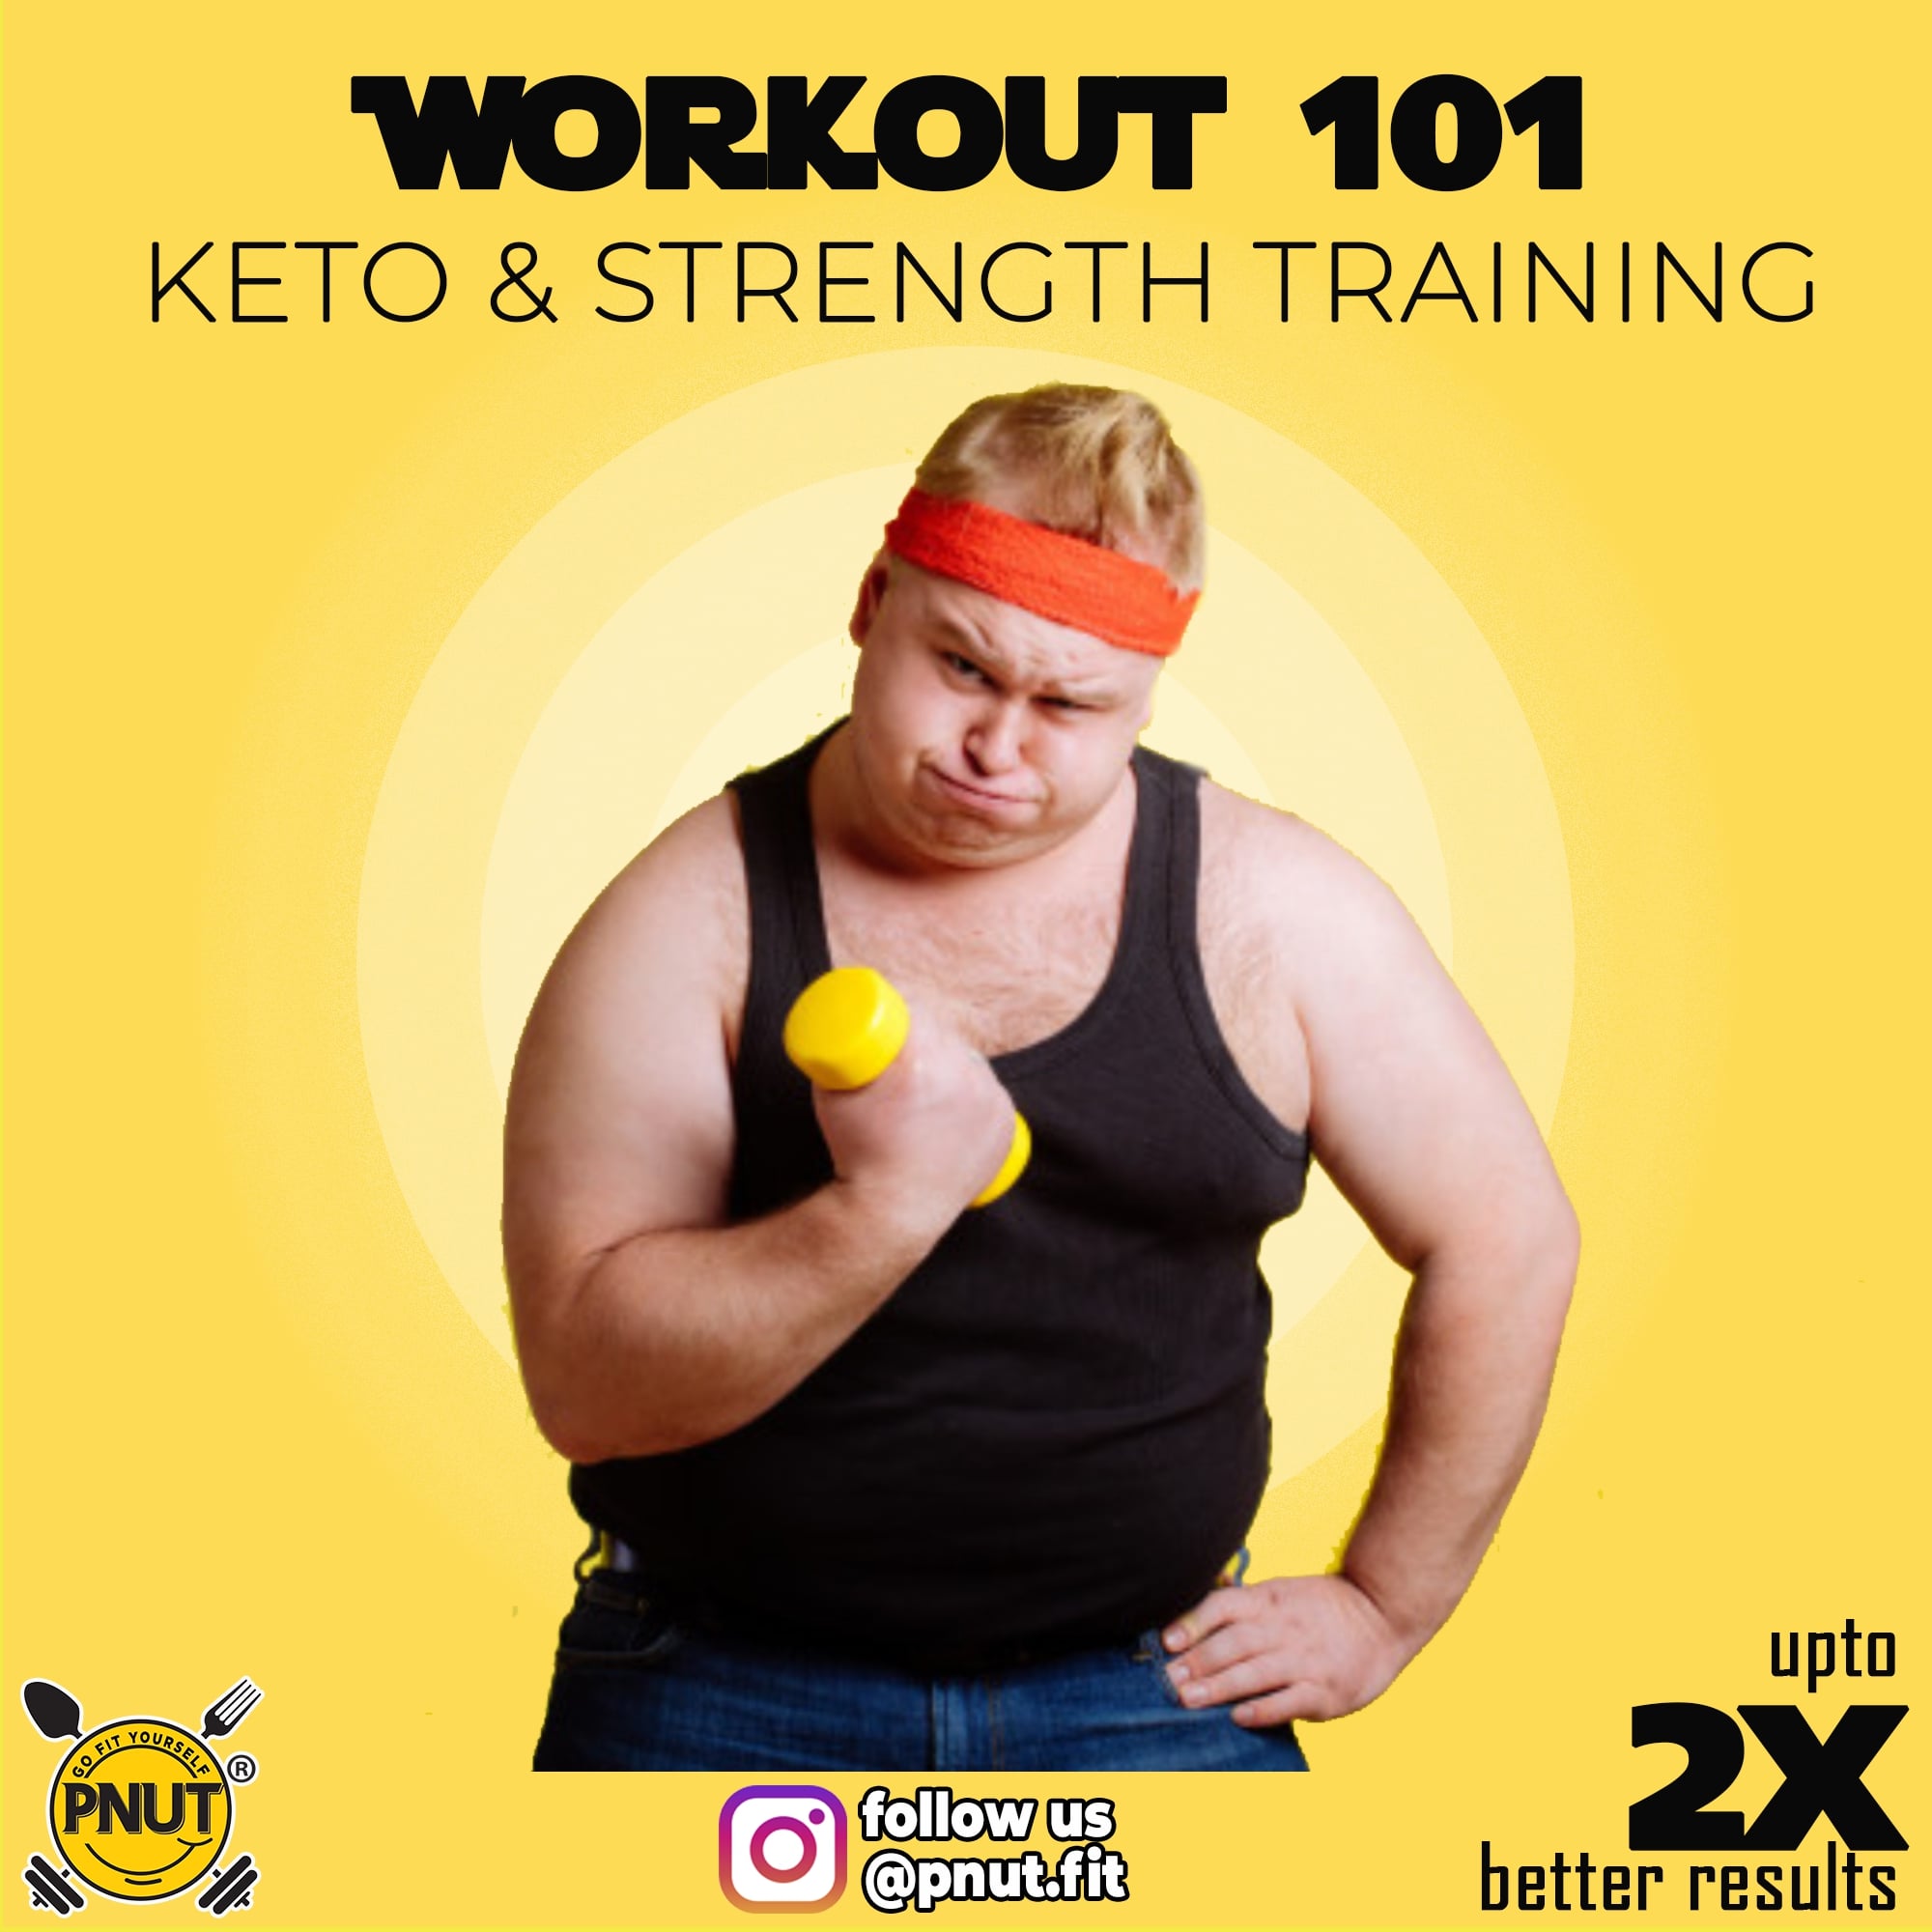 Workout 101: Weight Training on KETO?